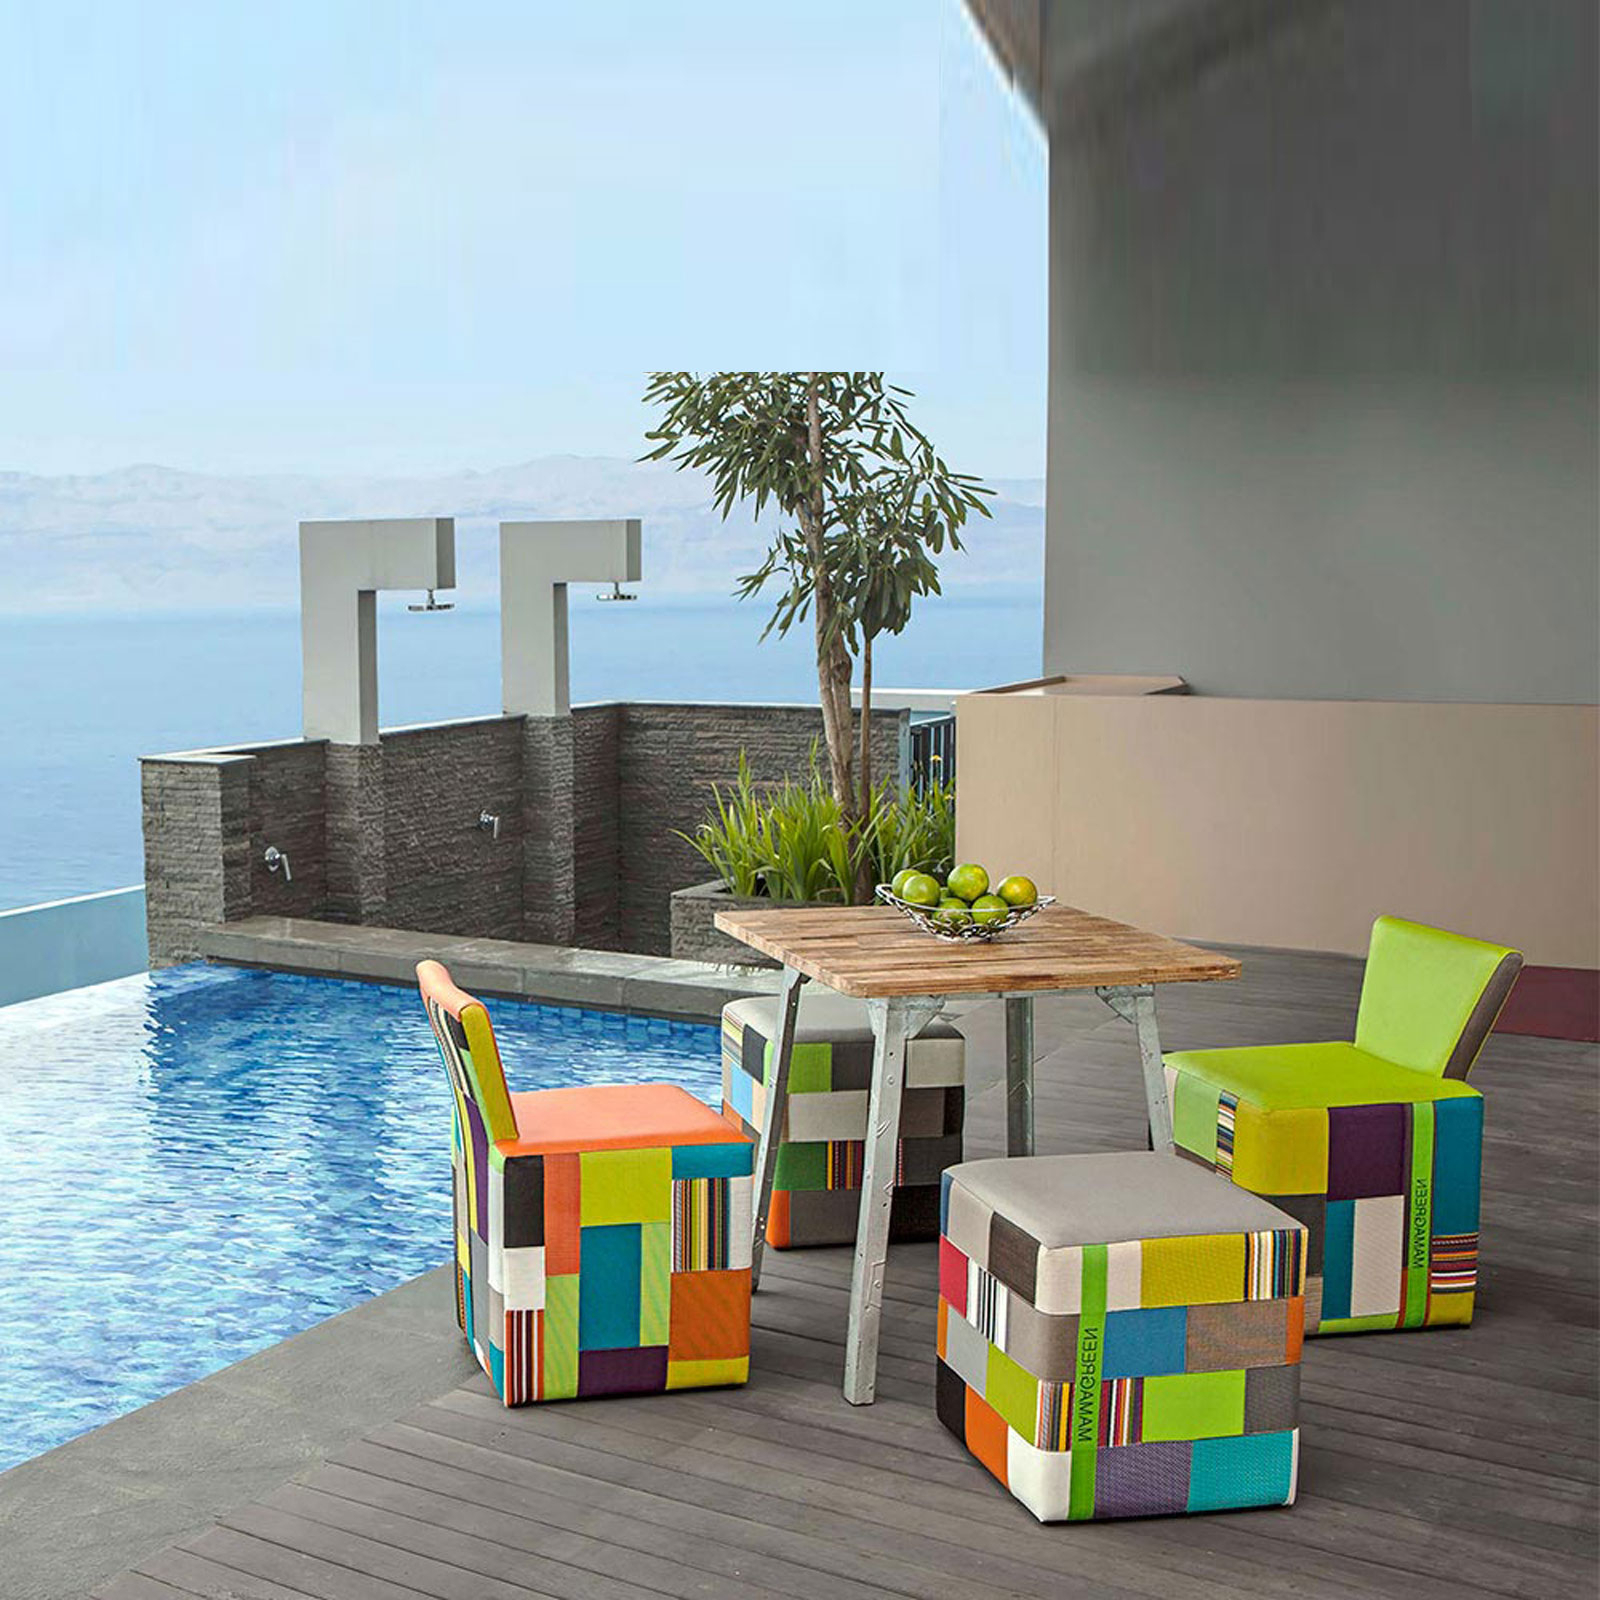 Contemporary Outdoor Furniture As A Companion To Nature